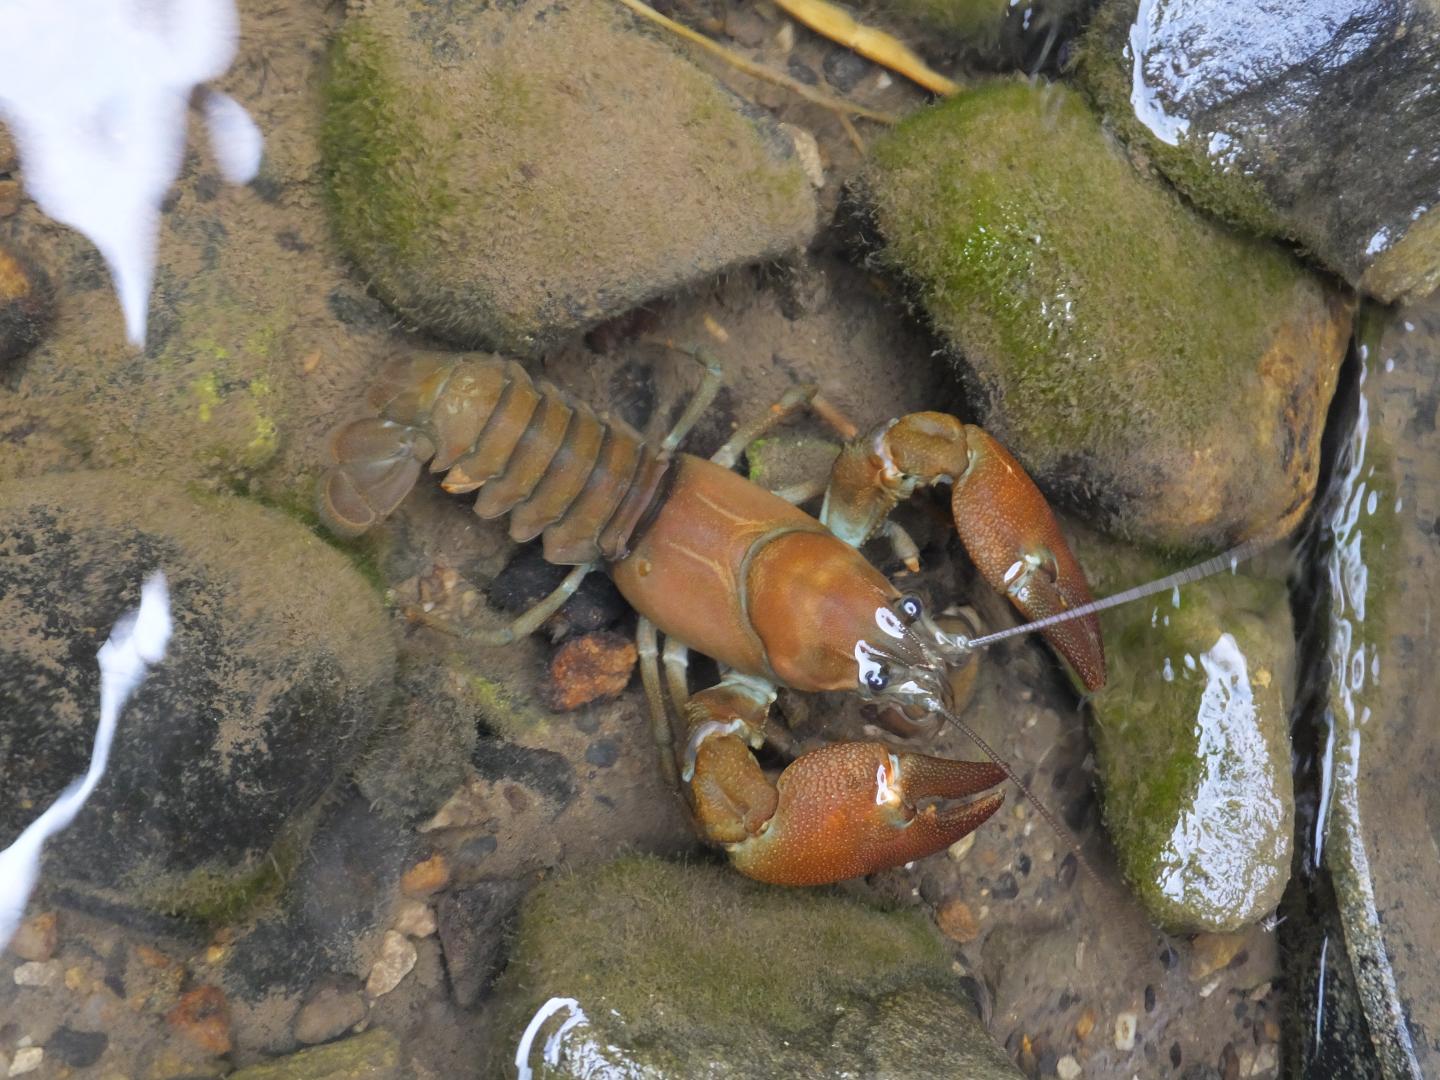 Crayfish 'trapping' fails to control invasive